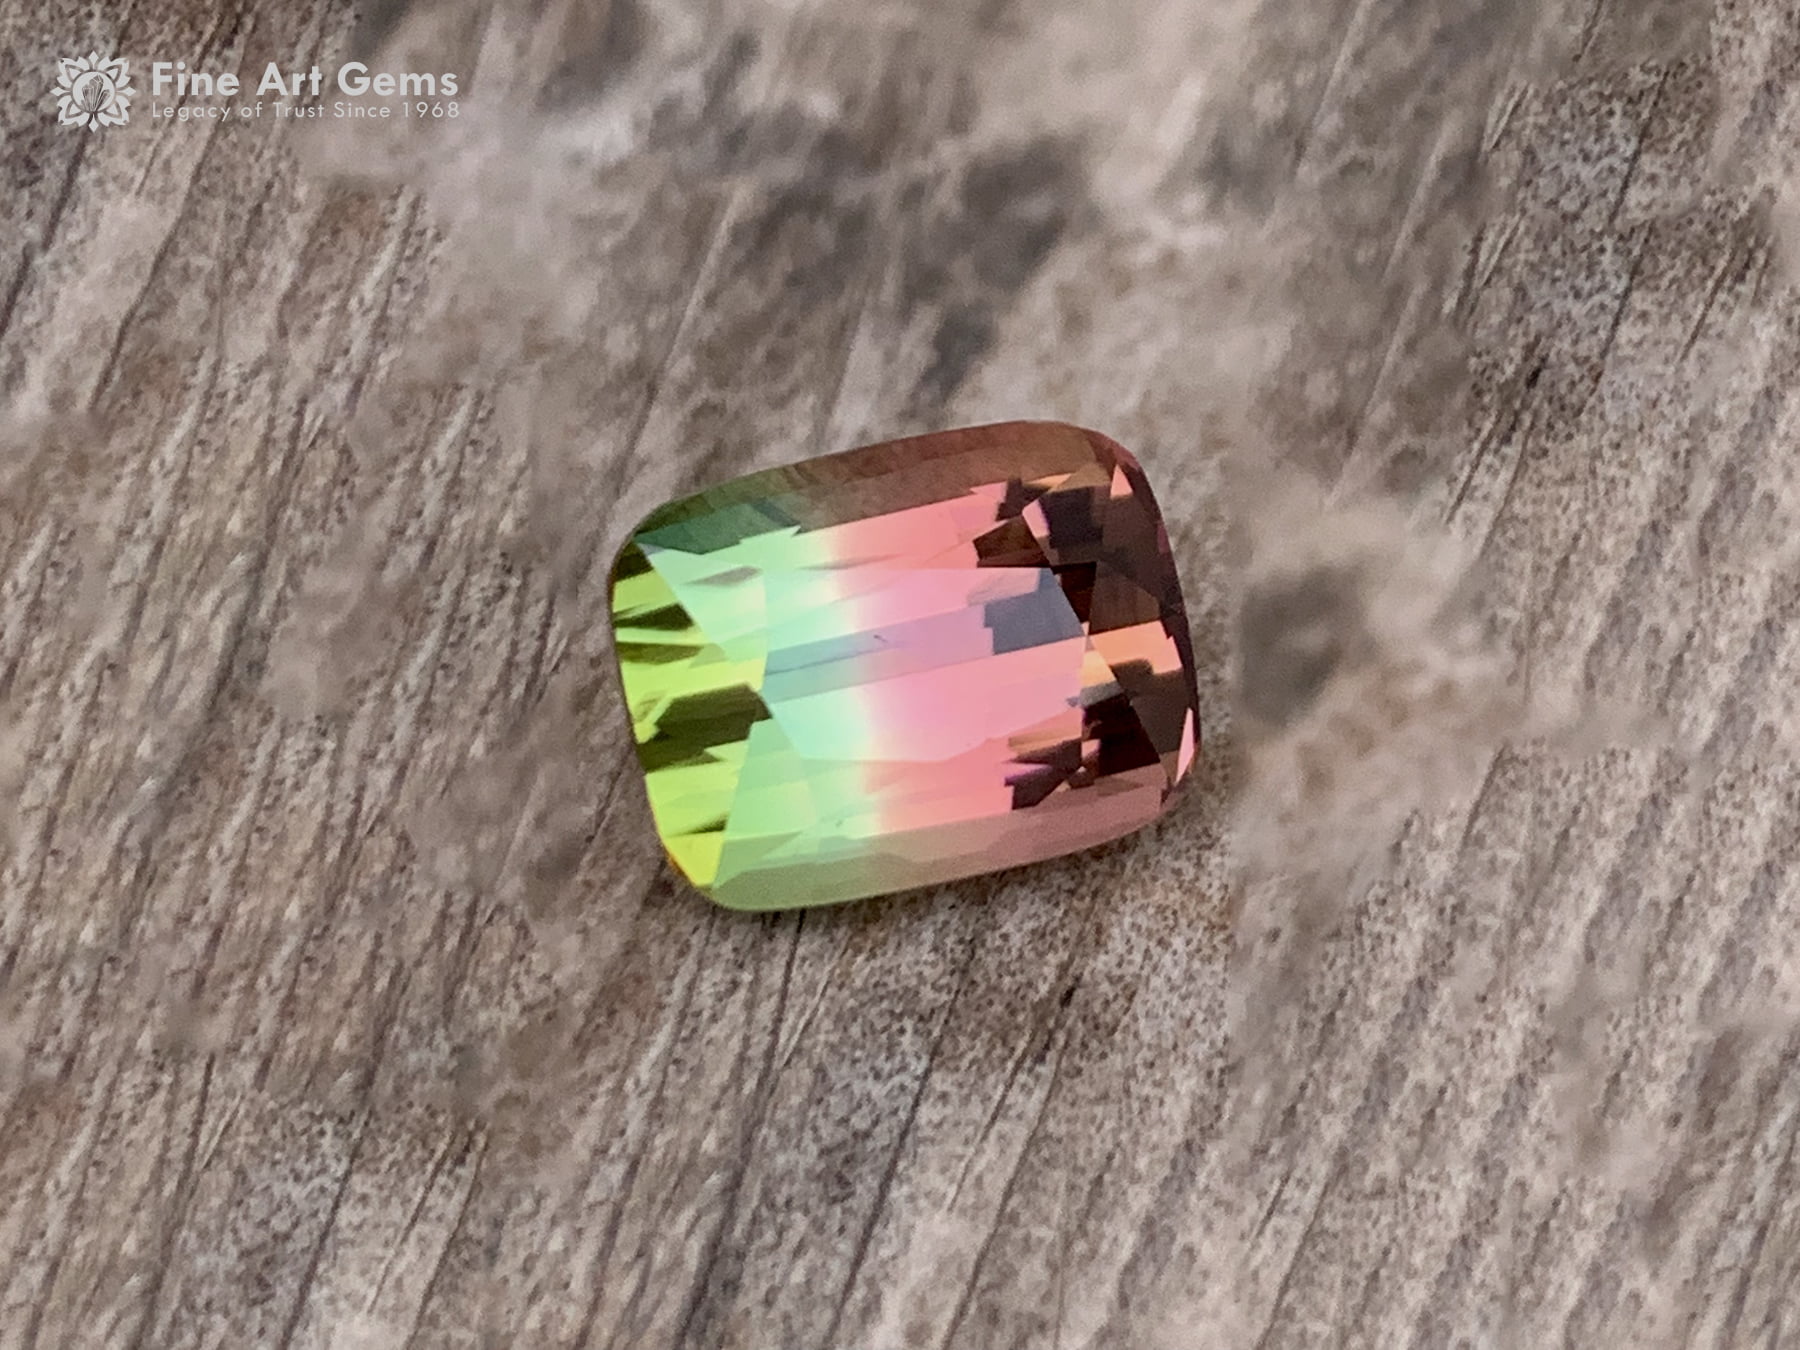 4.7 ct Bicolor Fancy Tourmaline Gemstone from Afghanistan